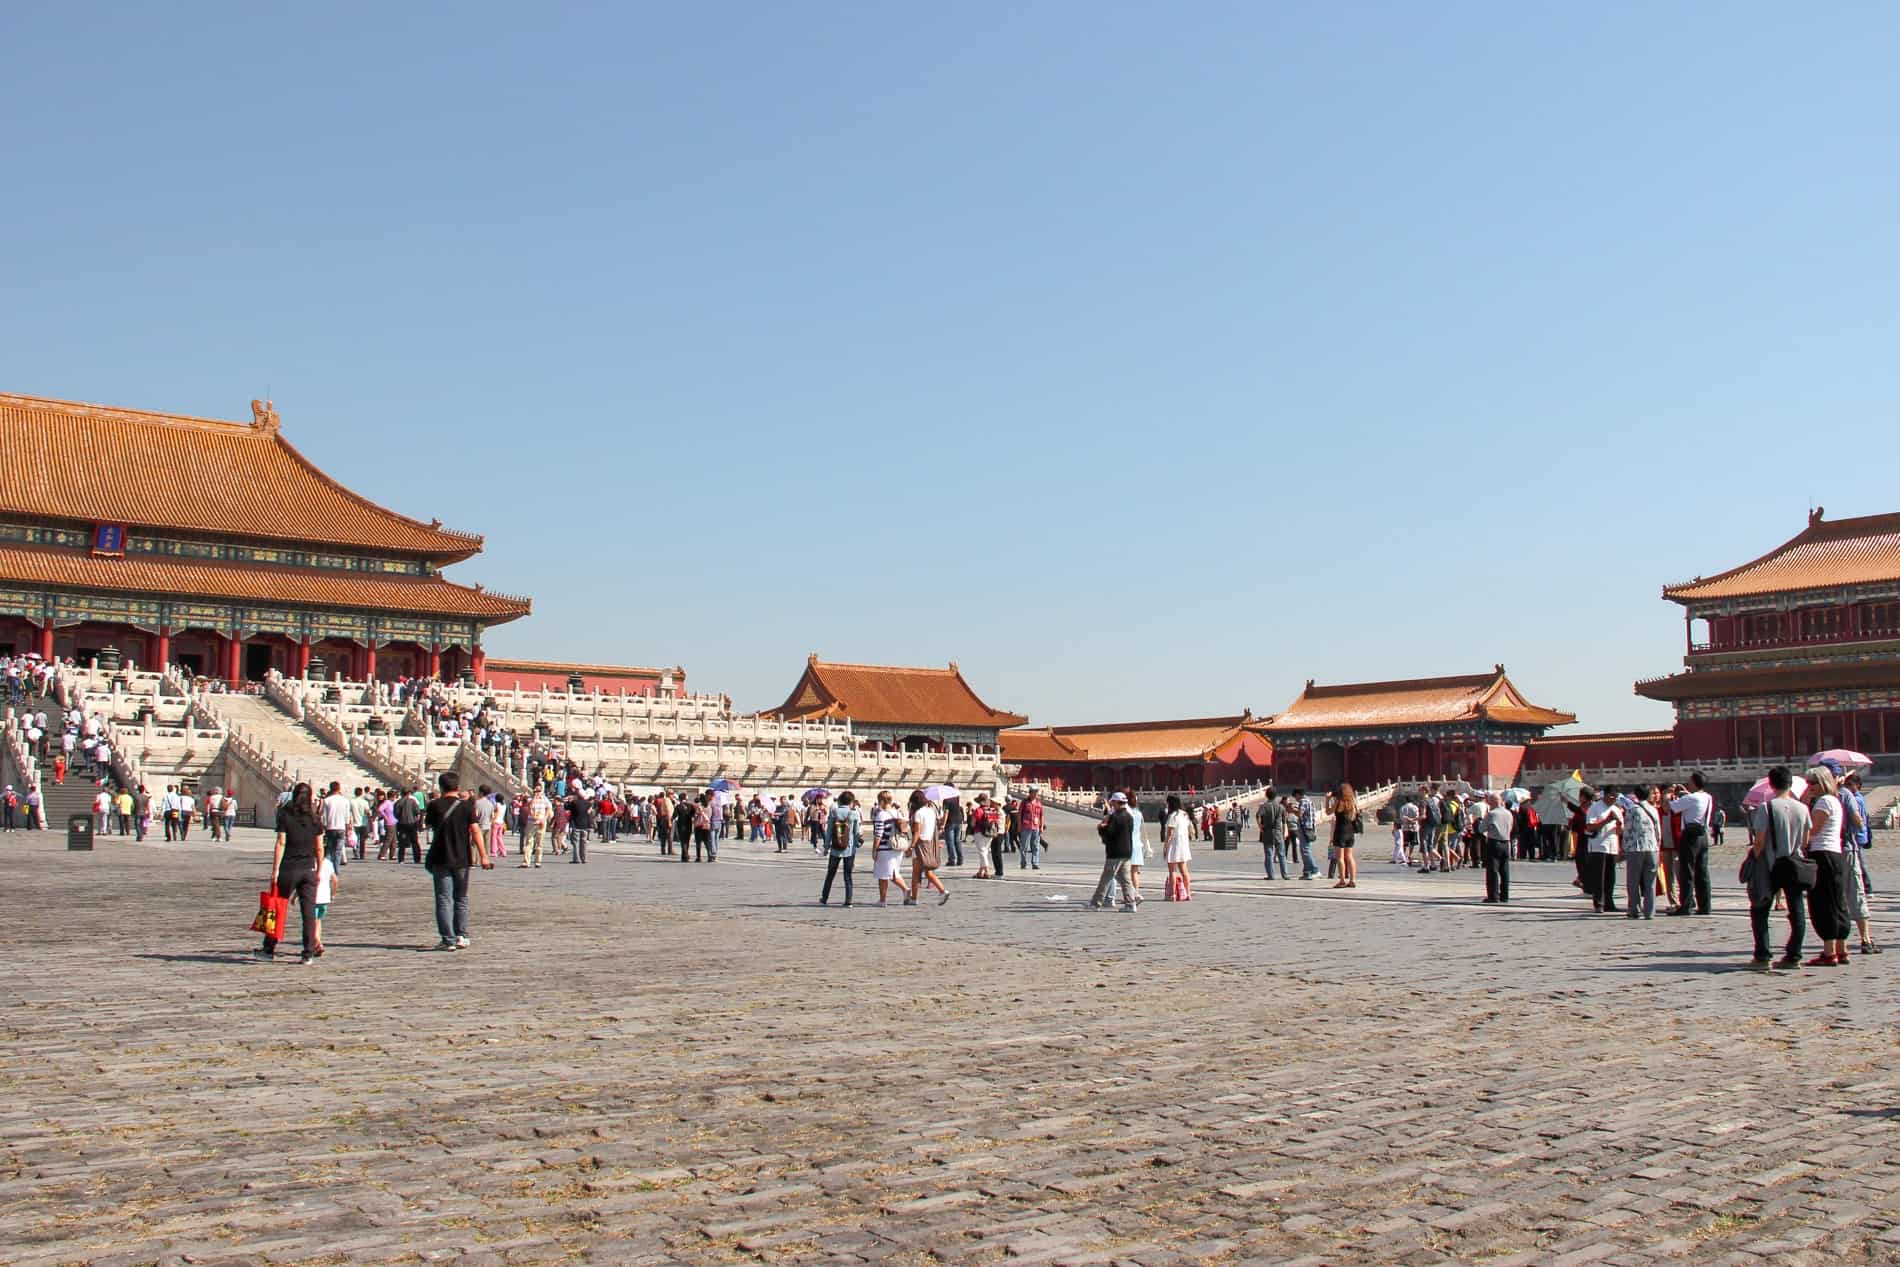 A mass of people of an open square surrounded by traditional Chinese pagada buildings of a former imperial palace complex. 